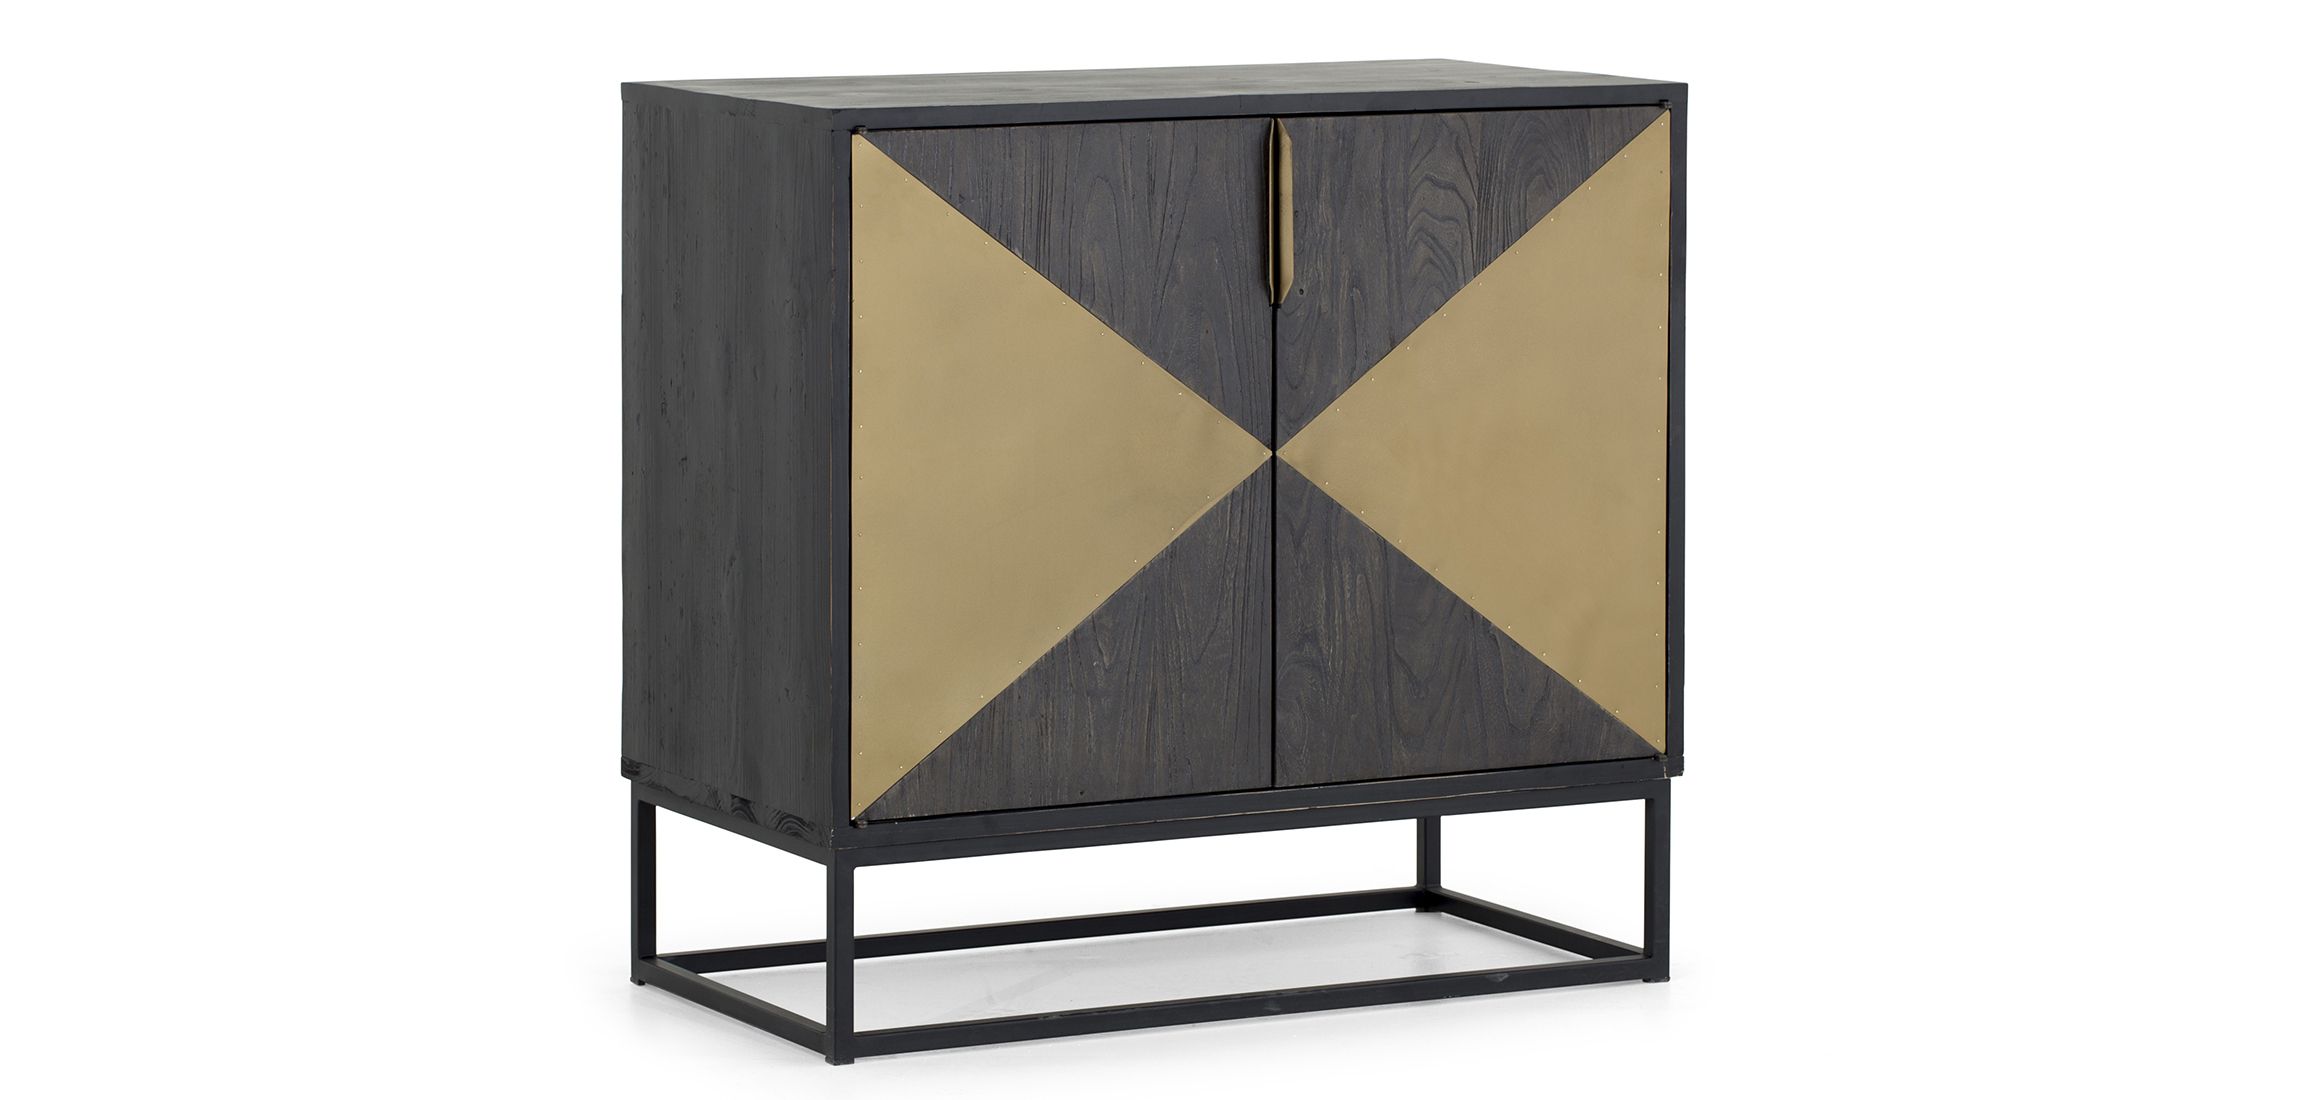 Farnell – Sideboard, 2 Doors | Flamant Inside Current Adkins Sideboards (Photo 11 of 20)